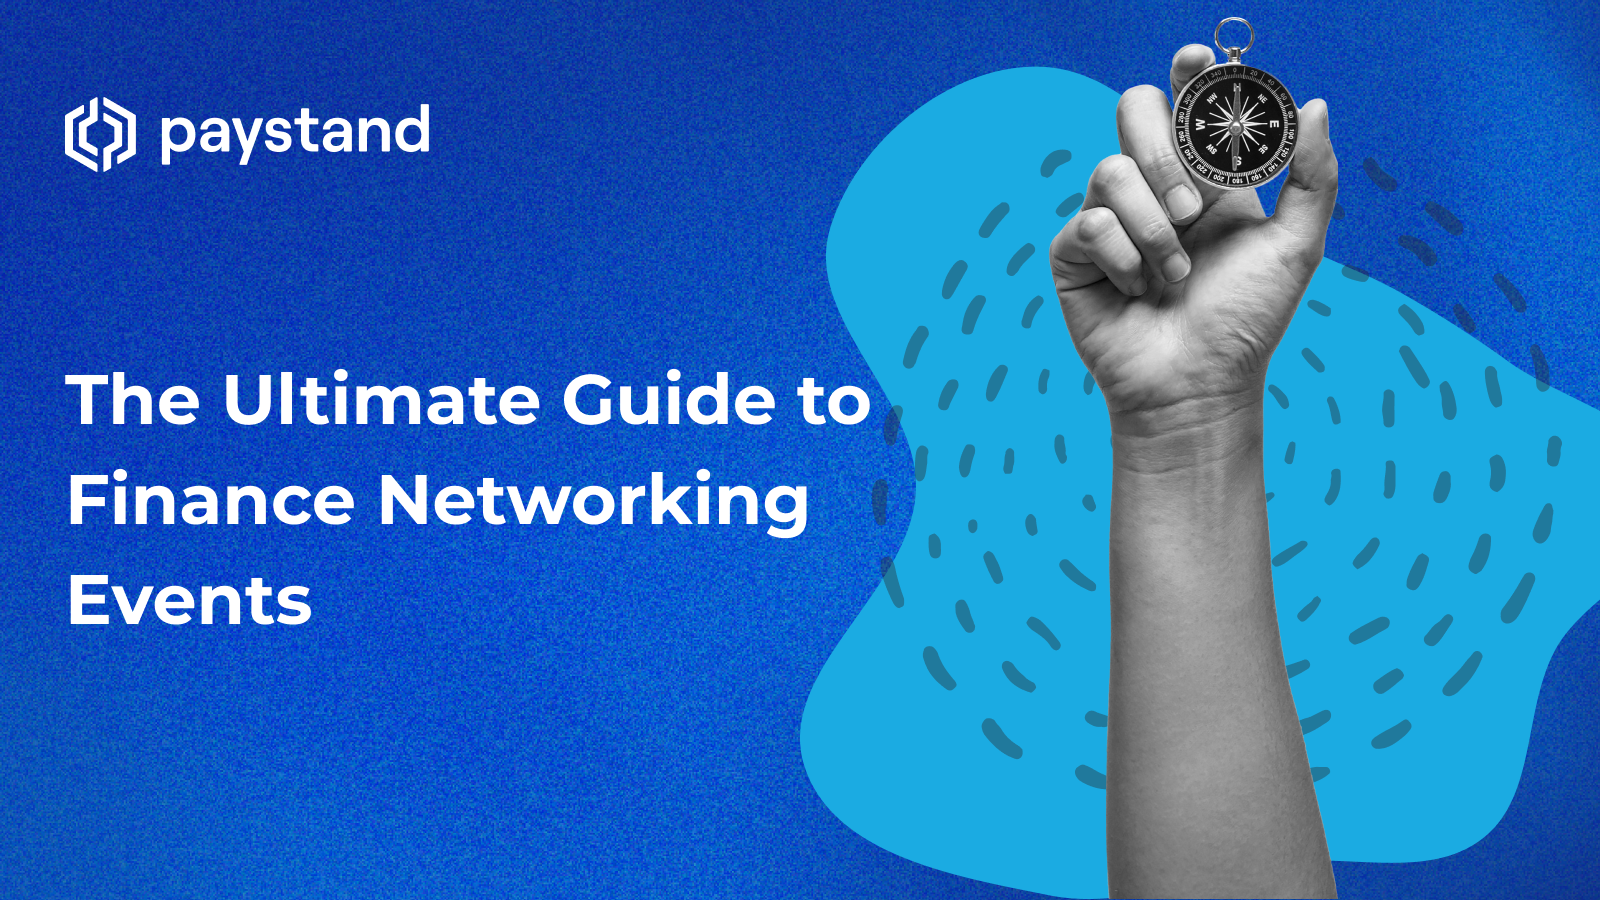 The Ultimate Guide to Finance Networking Events